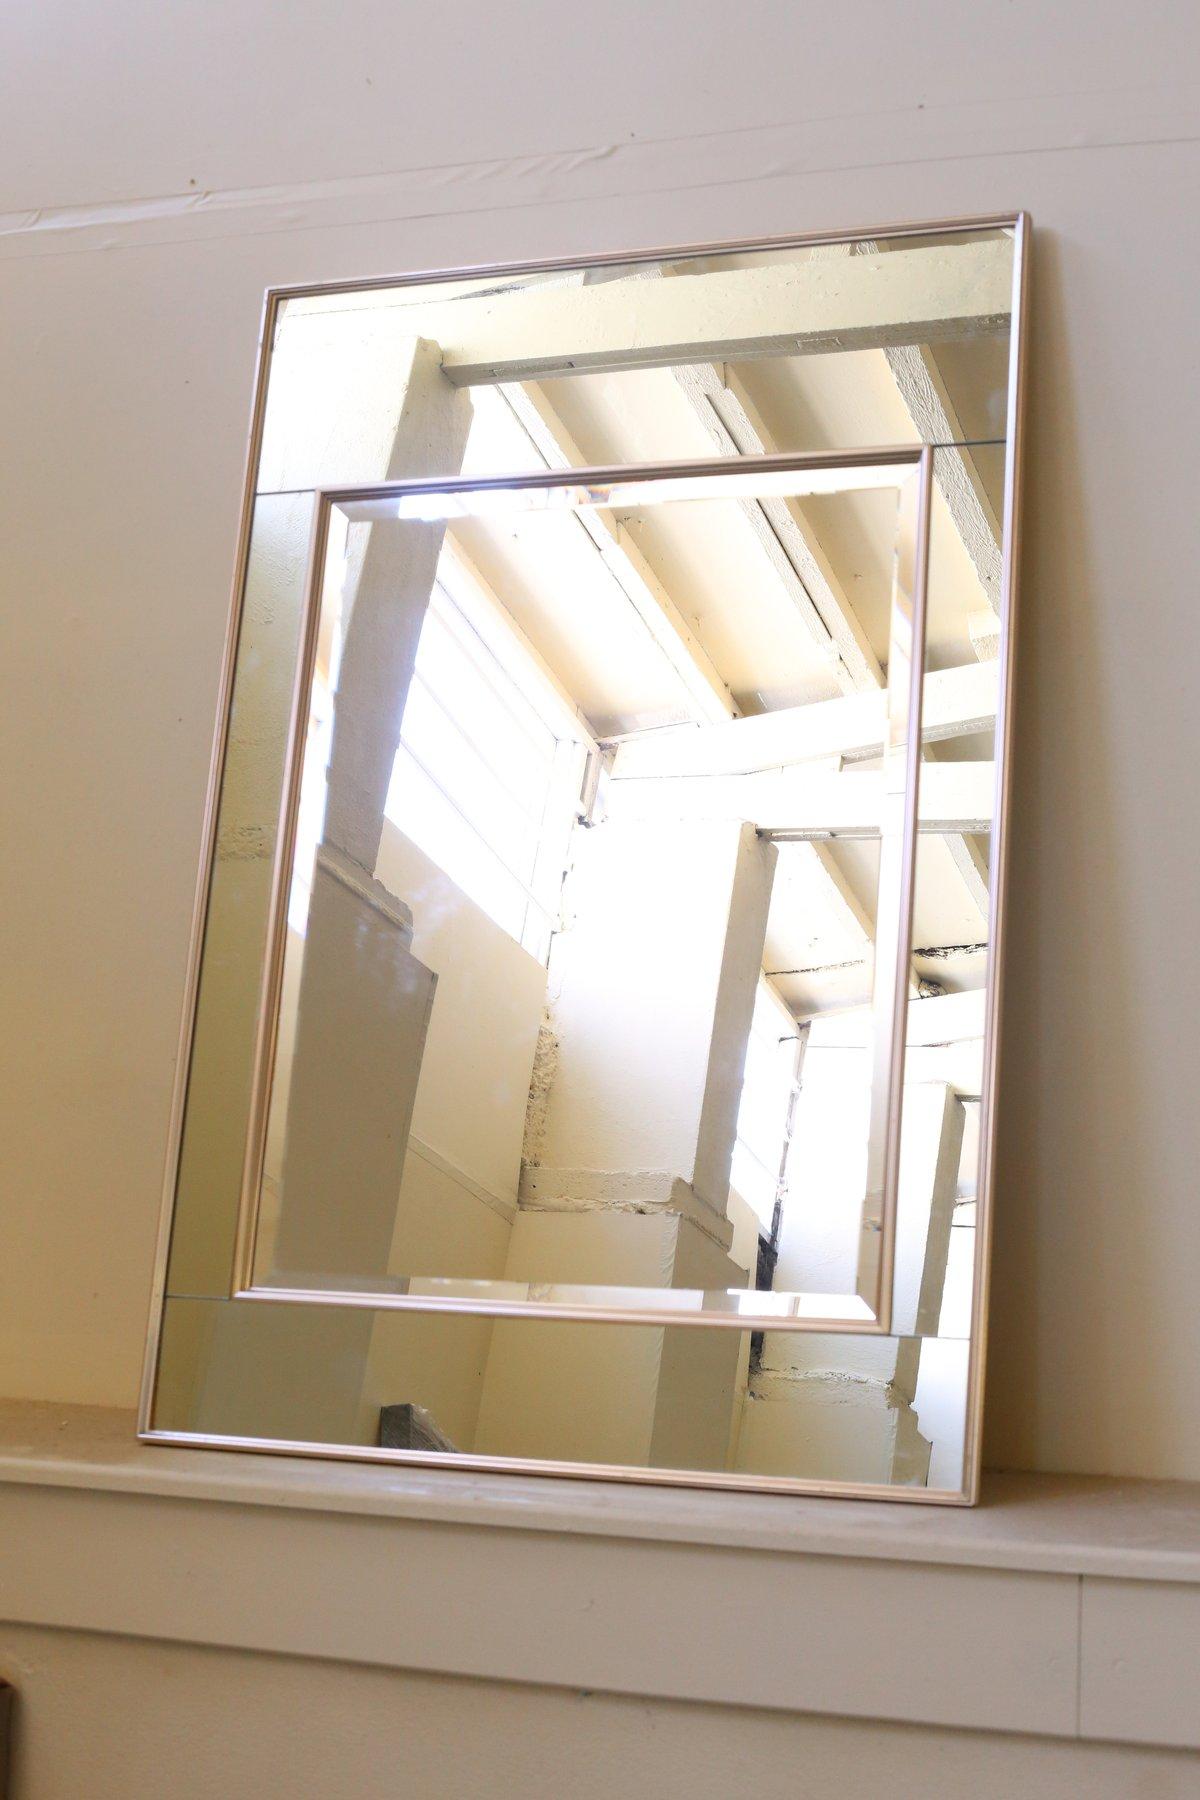 Hollywood Regency style wall mirror designed by LaBarge. Designed in the 1980s with mirrored panels encased in a rose gold tone reeded frame surrounding an inset bevelled mirror. This mirror adds presence and glamour to any room.